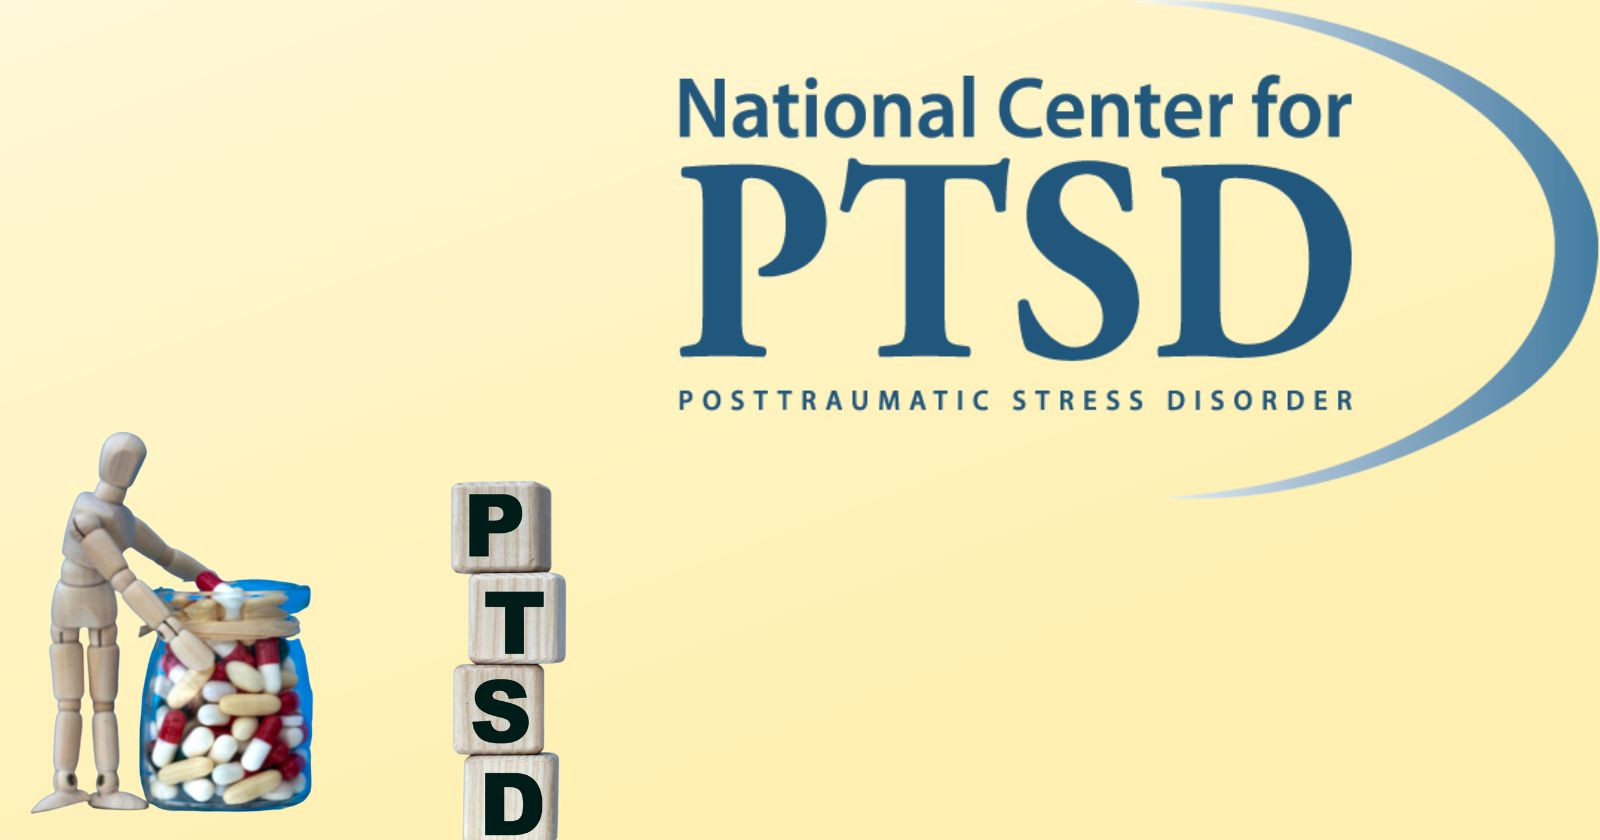 National center for PTSD

Robot with medicine box